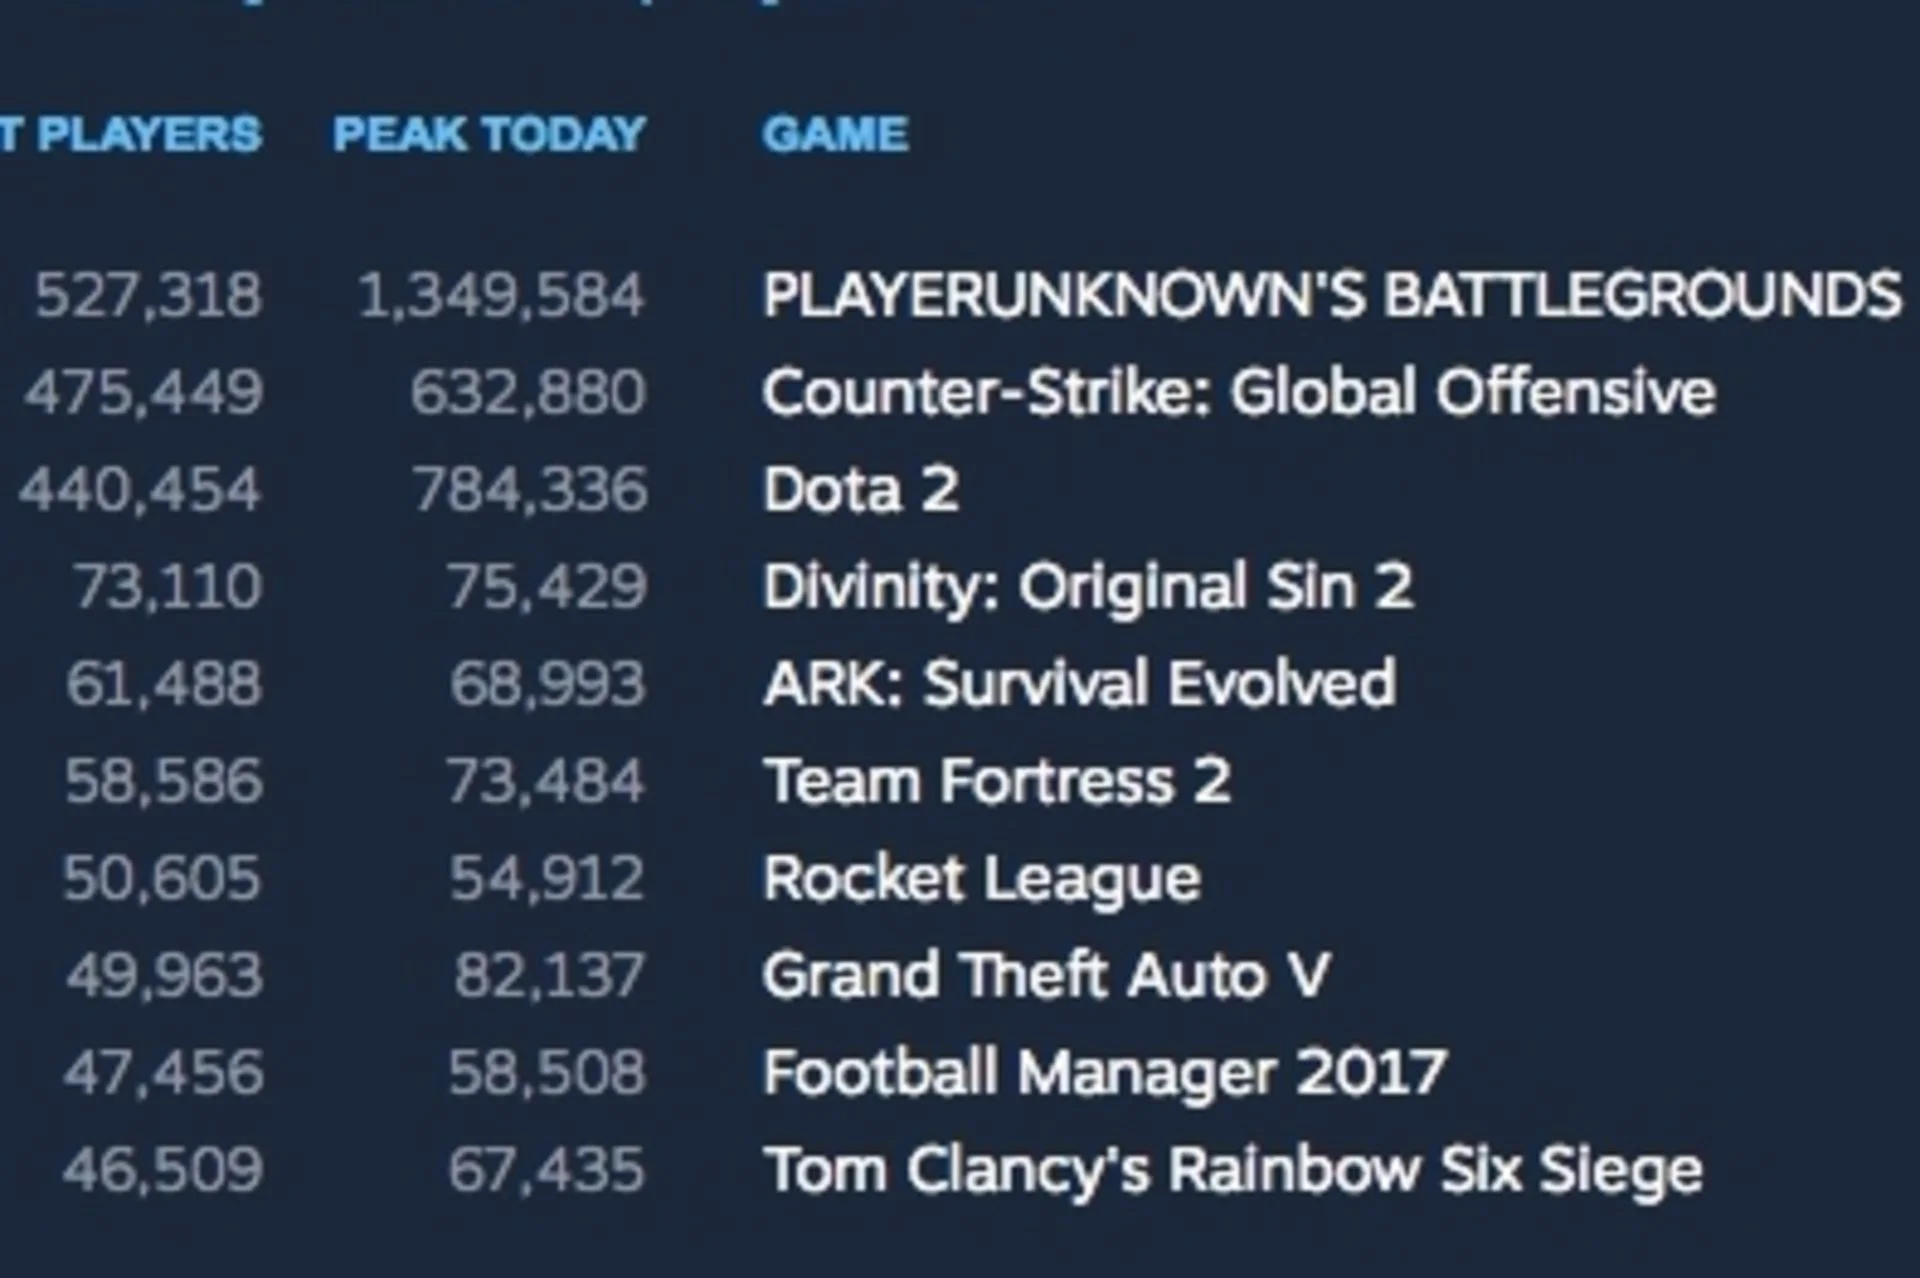 Unknown facts about PUBG